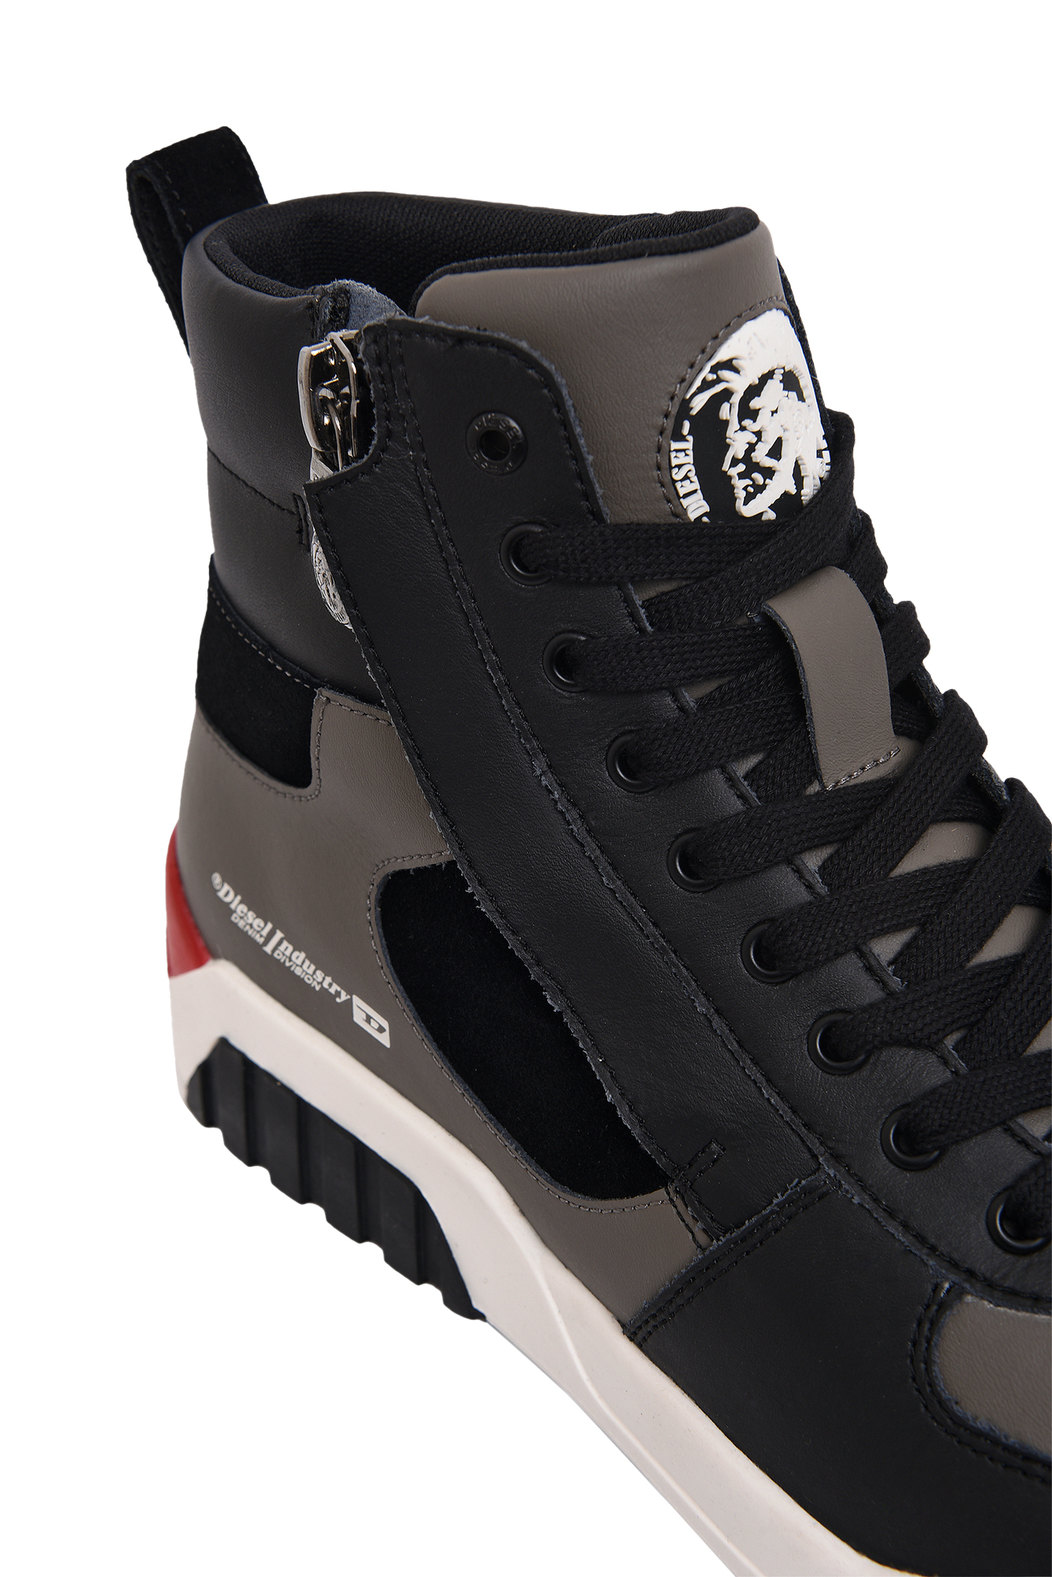 High-top sneakers in leather and suede